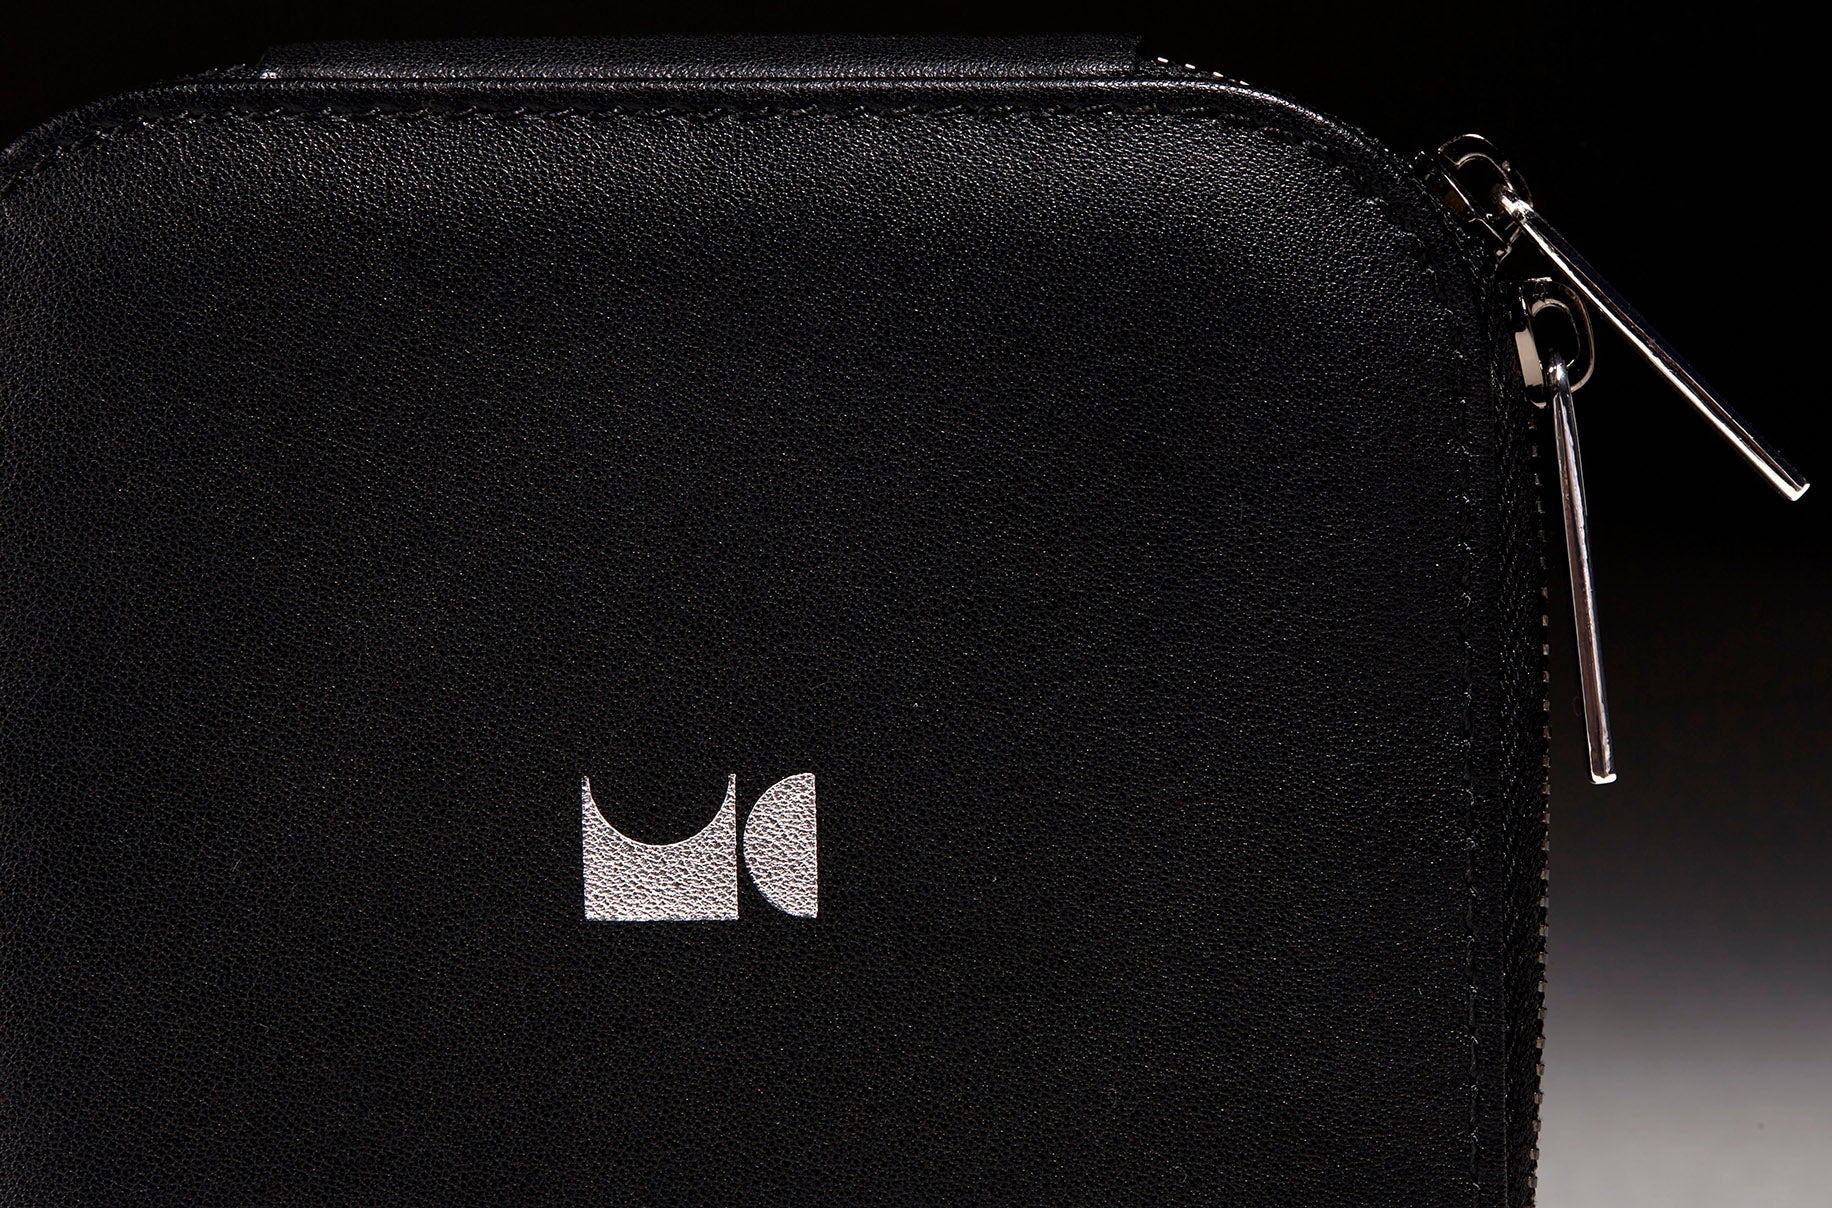 Close up view of jewelry case zippers in front of a black back drop